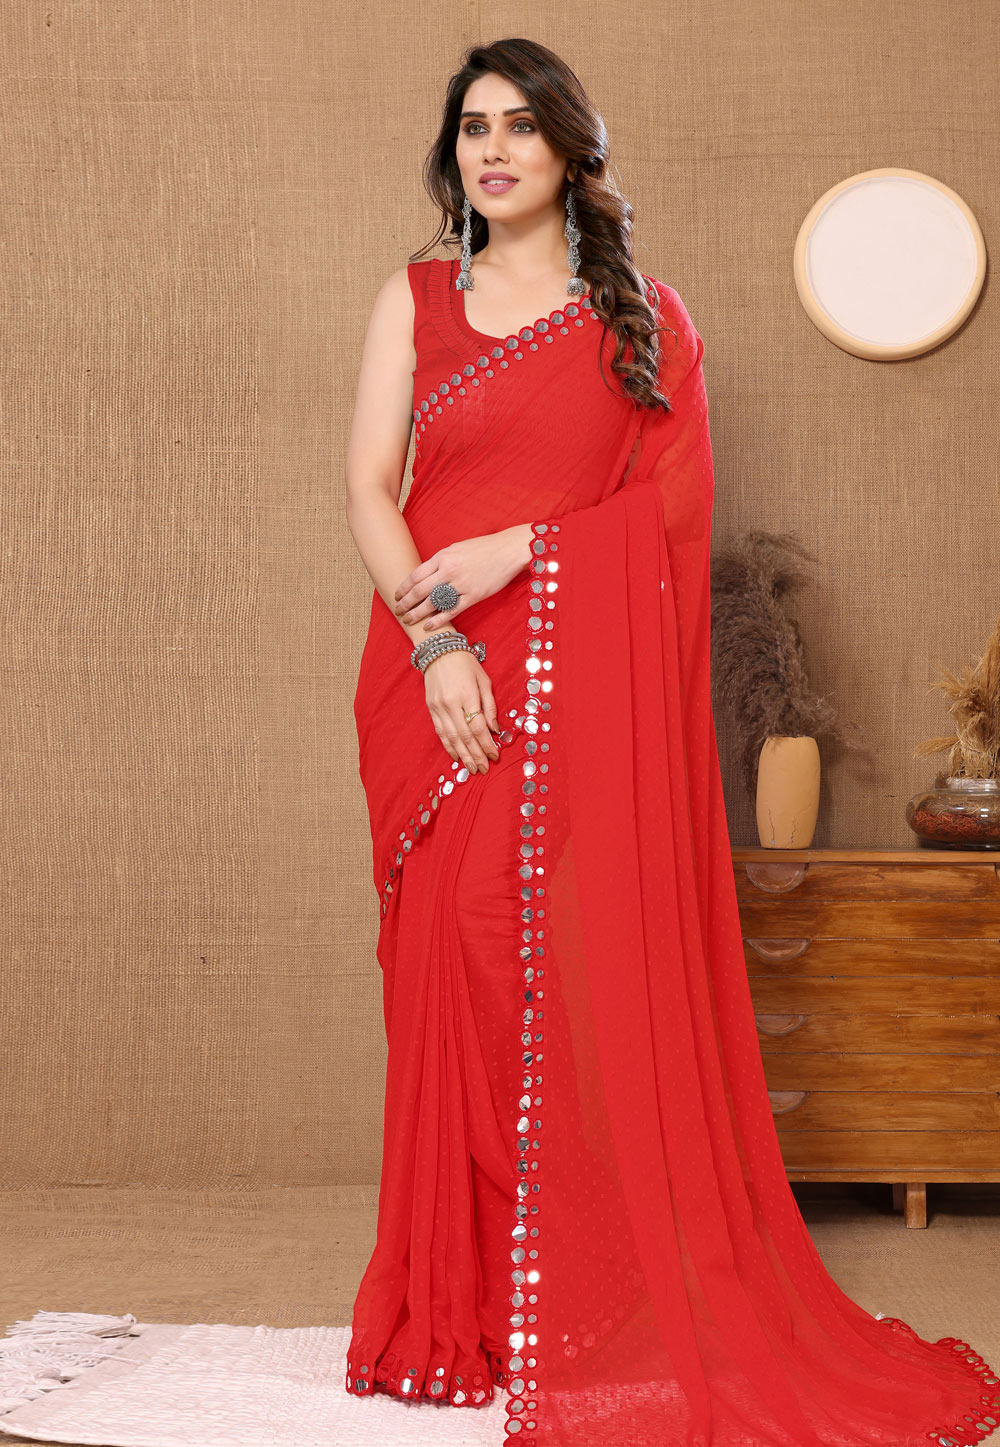 Red Chiffon Saree With Blouse 282285